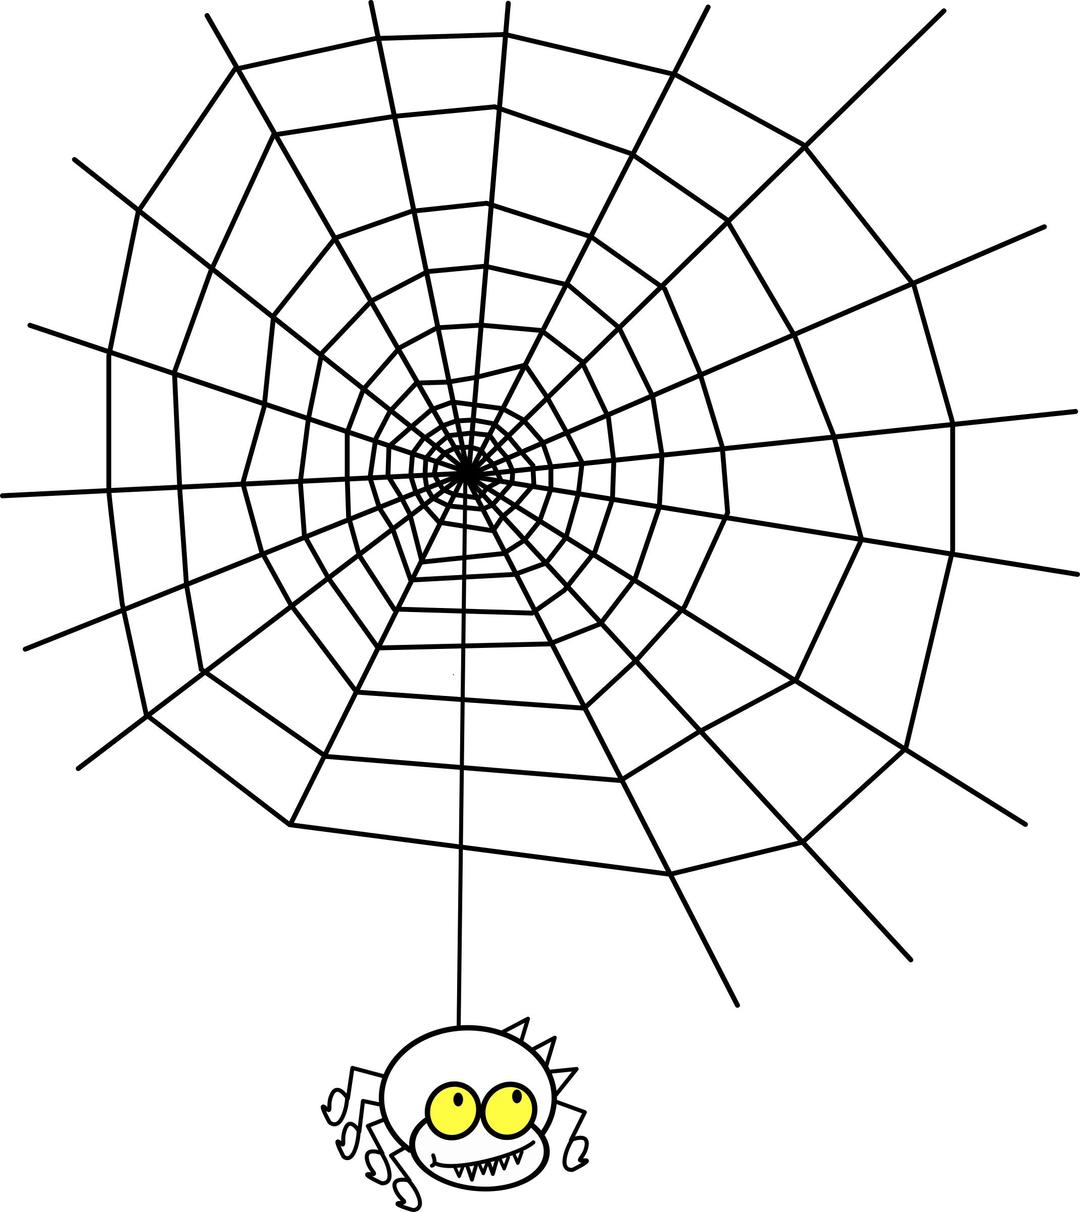 ragno the spider with a simple web png transparent